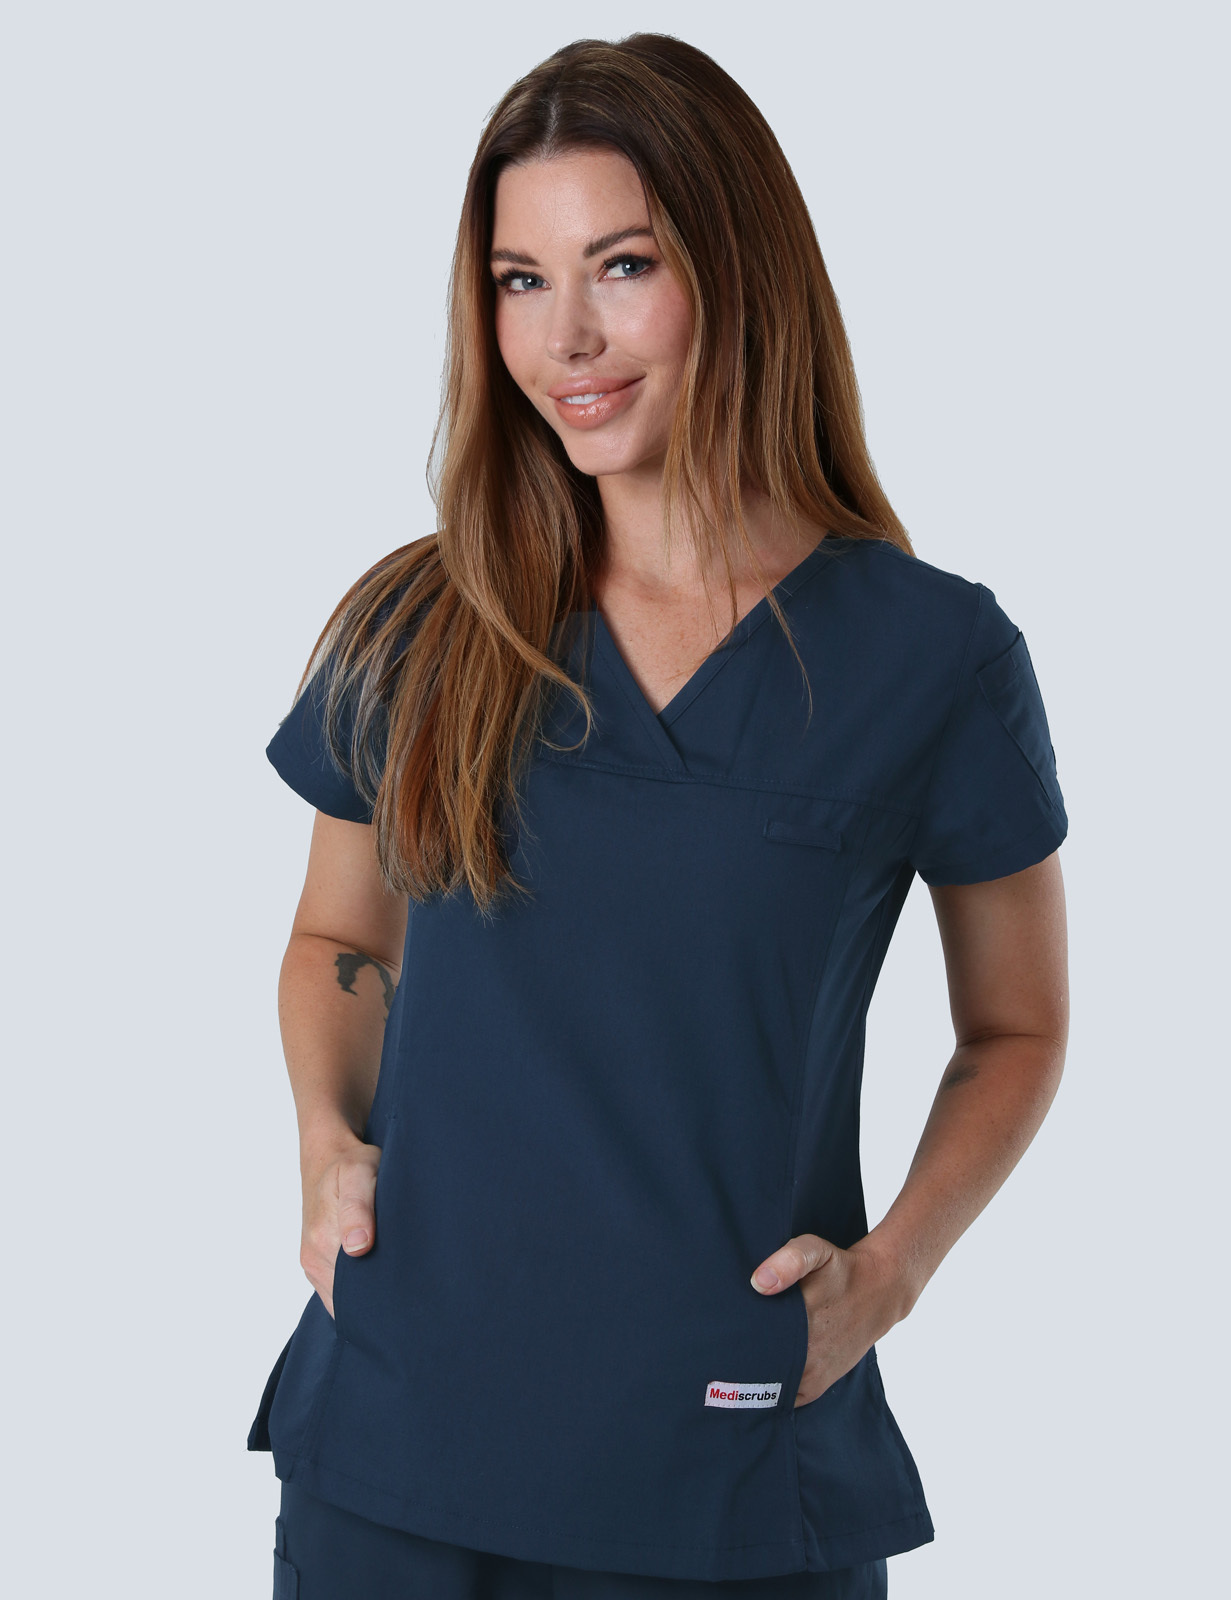 UQ Vets Gatton Animal Attendant Uniform Top Only Bundle (Women's Fit Solid Top in Navy incl Logos)